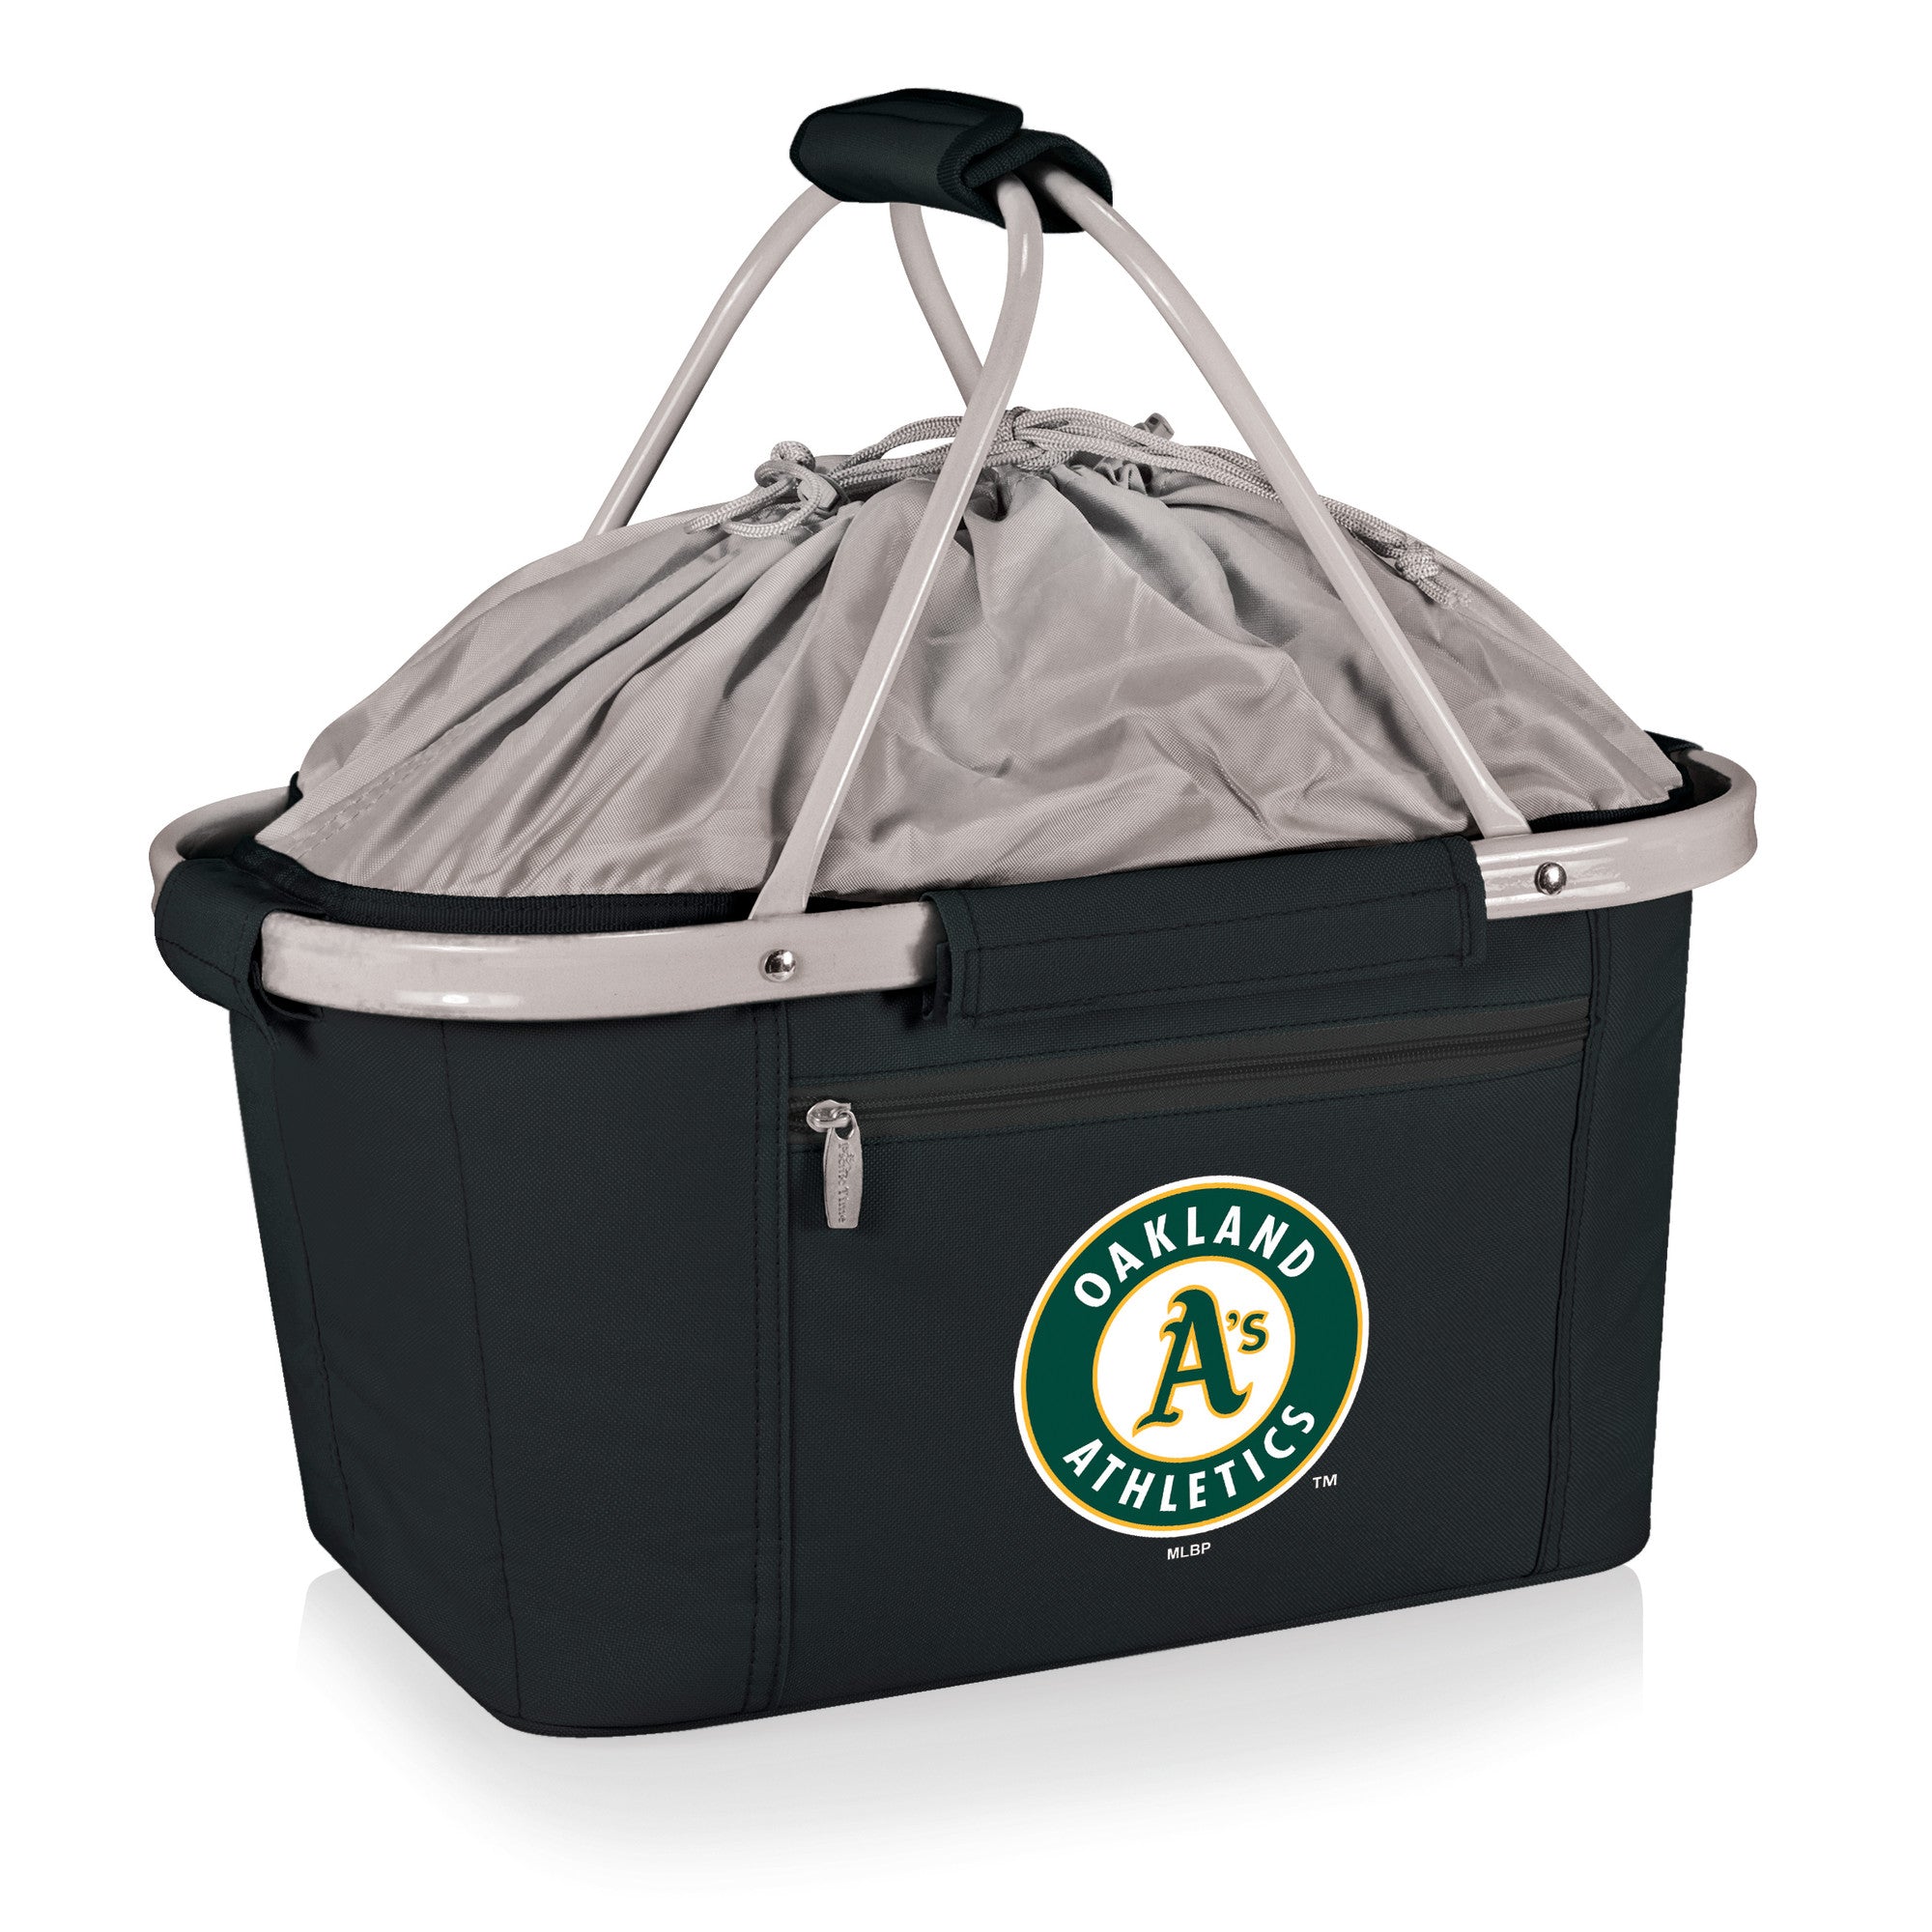 Oakland Athletics - Metro Basket Collapsible Cooler Tote